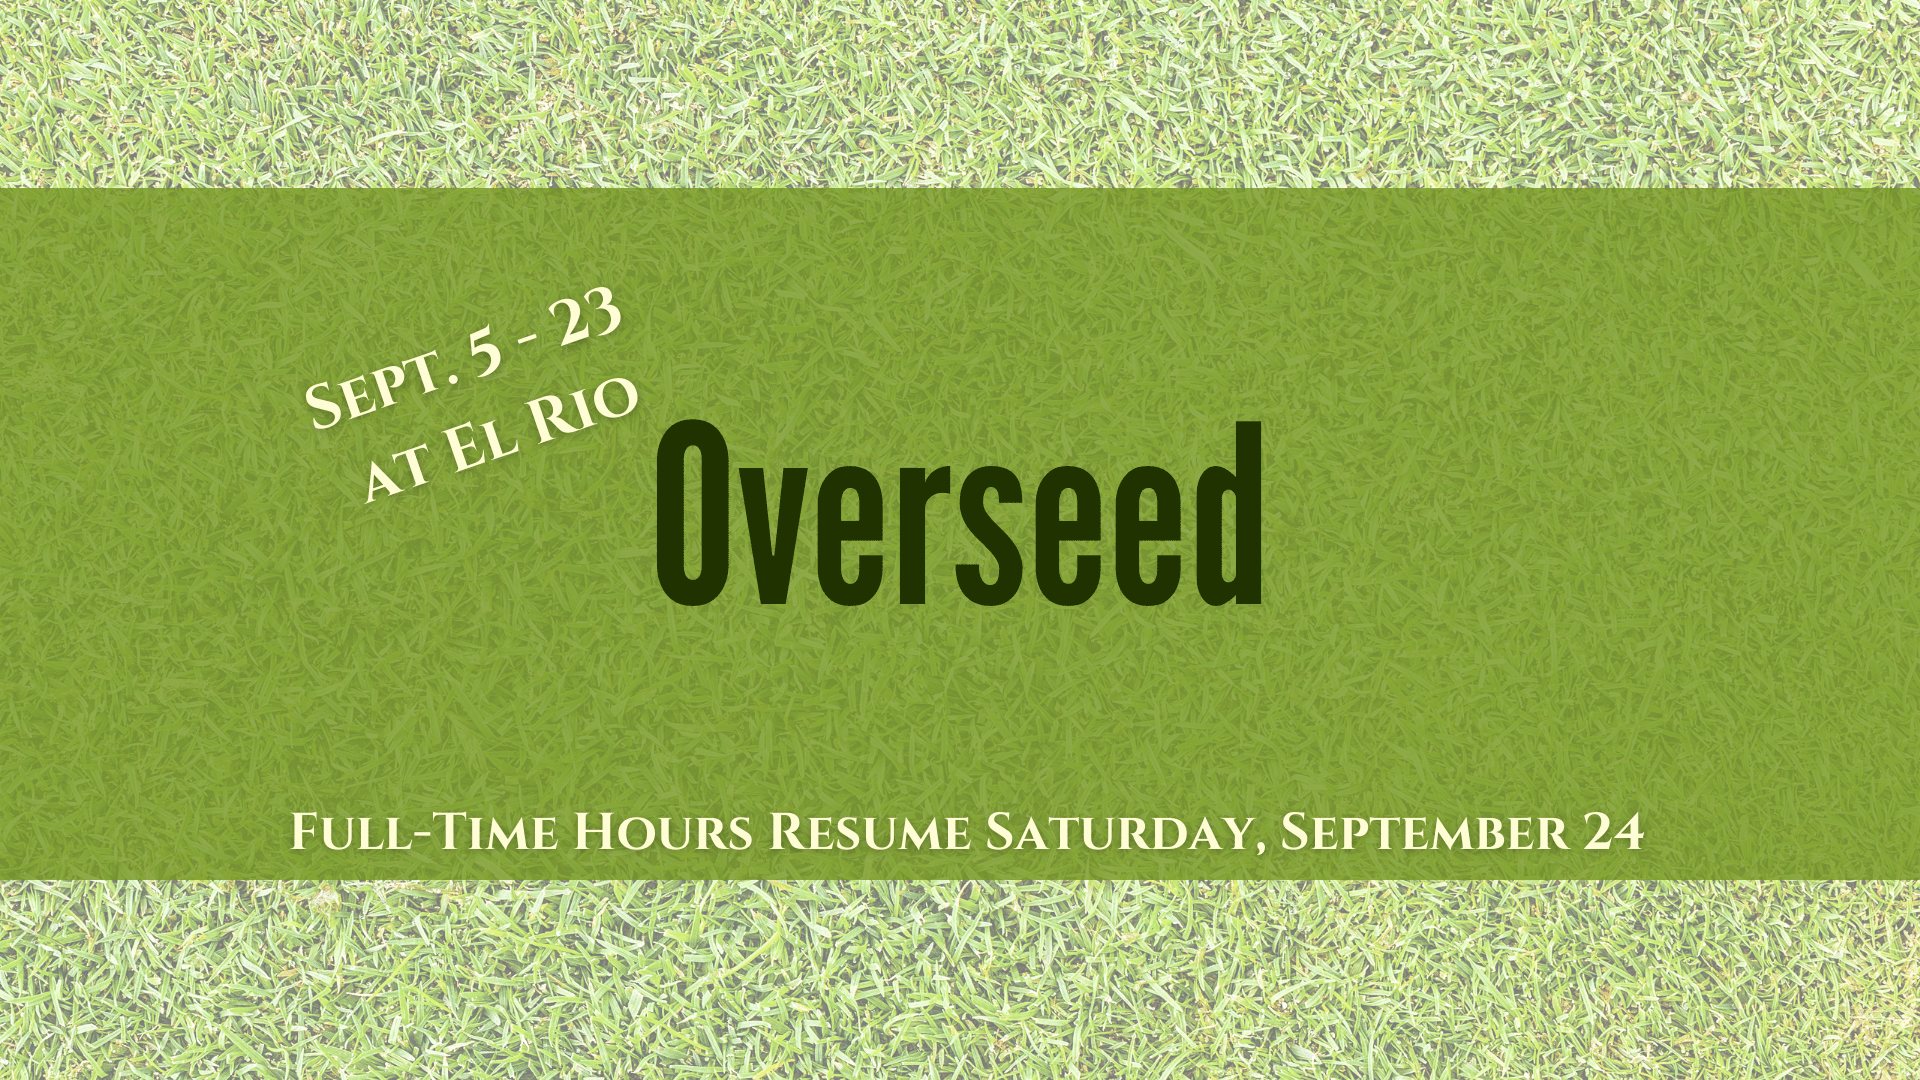 Course Closed for Overseeding